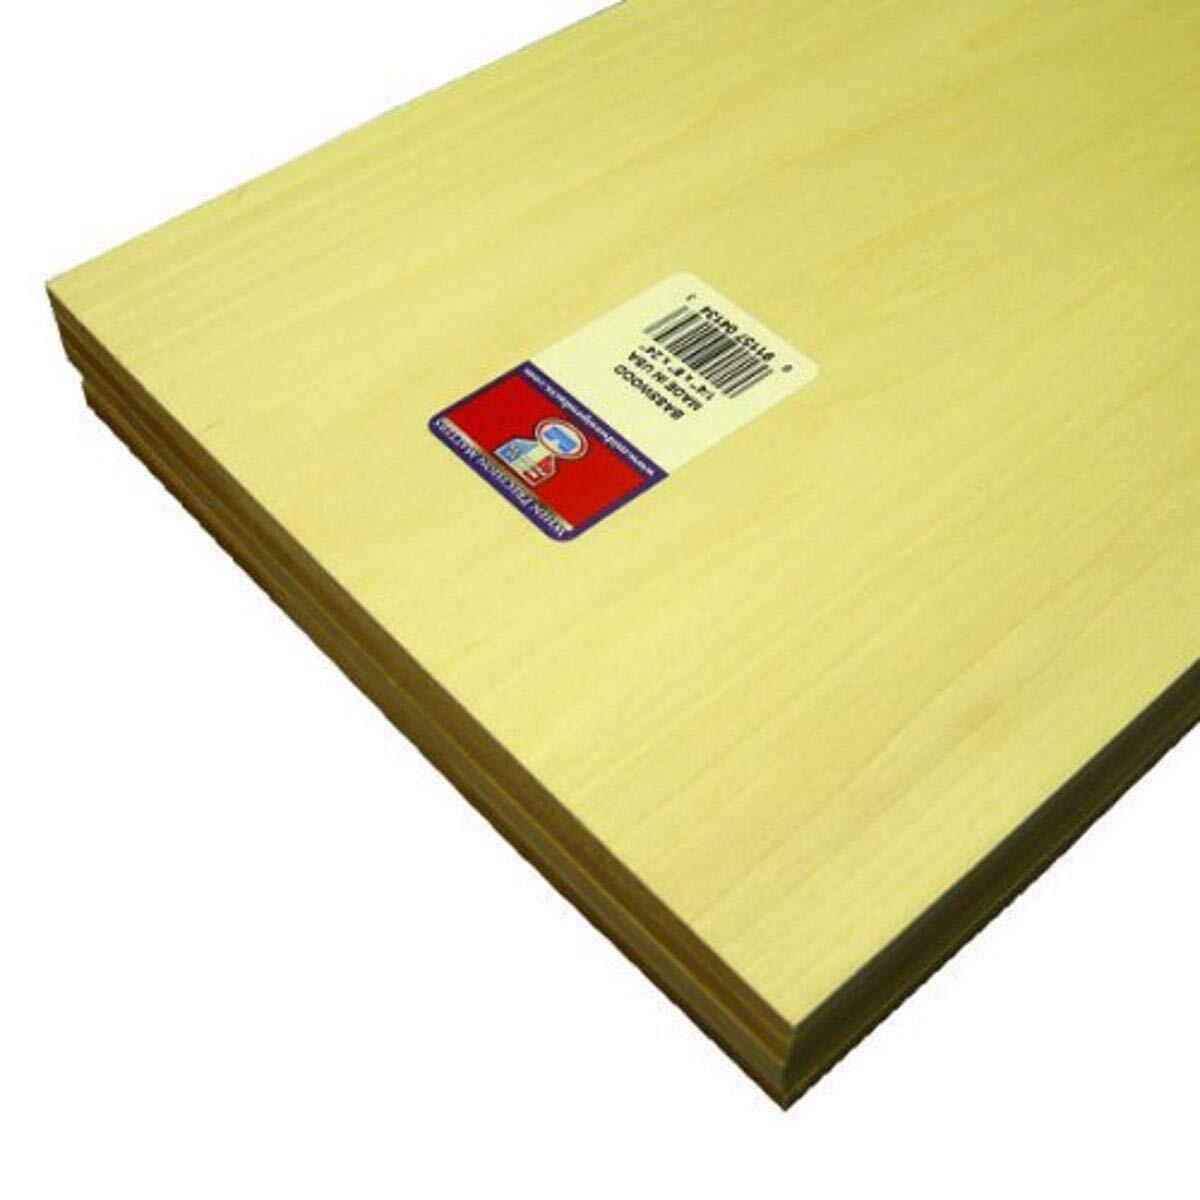 Midwest Products 4134 1/4" x 8" x 24" Basswood Sheet (Pack of 5)